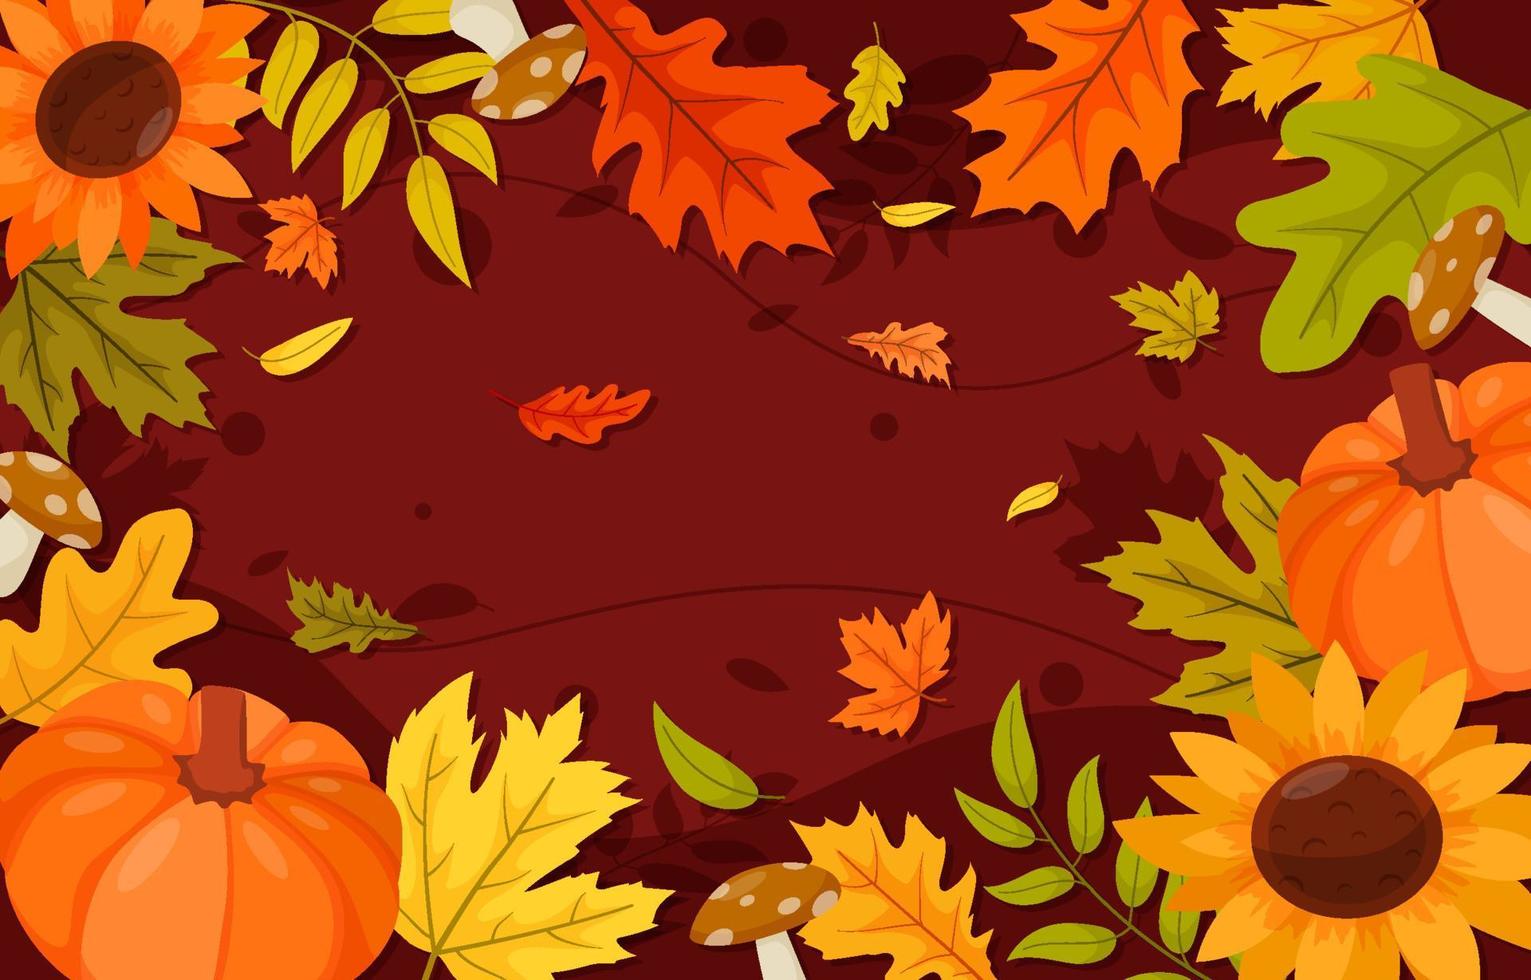 Fall Autumn Floral and Leaves Background vector